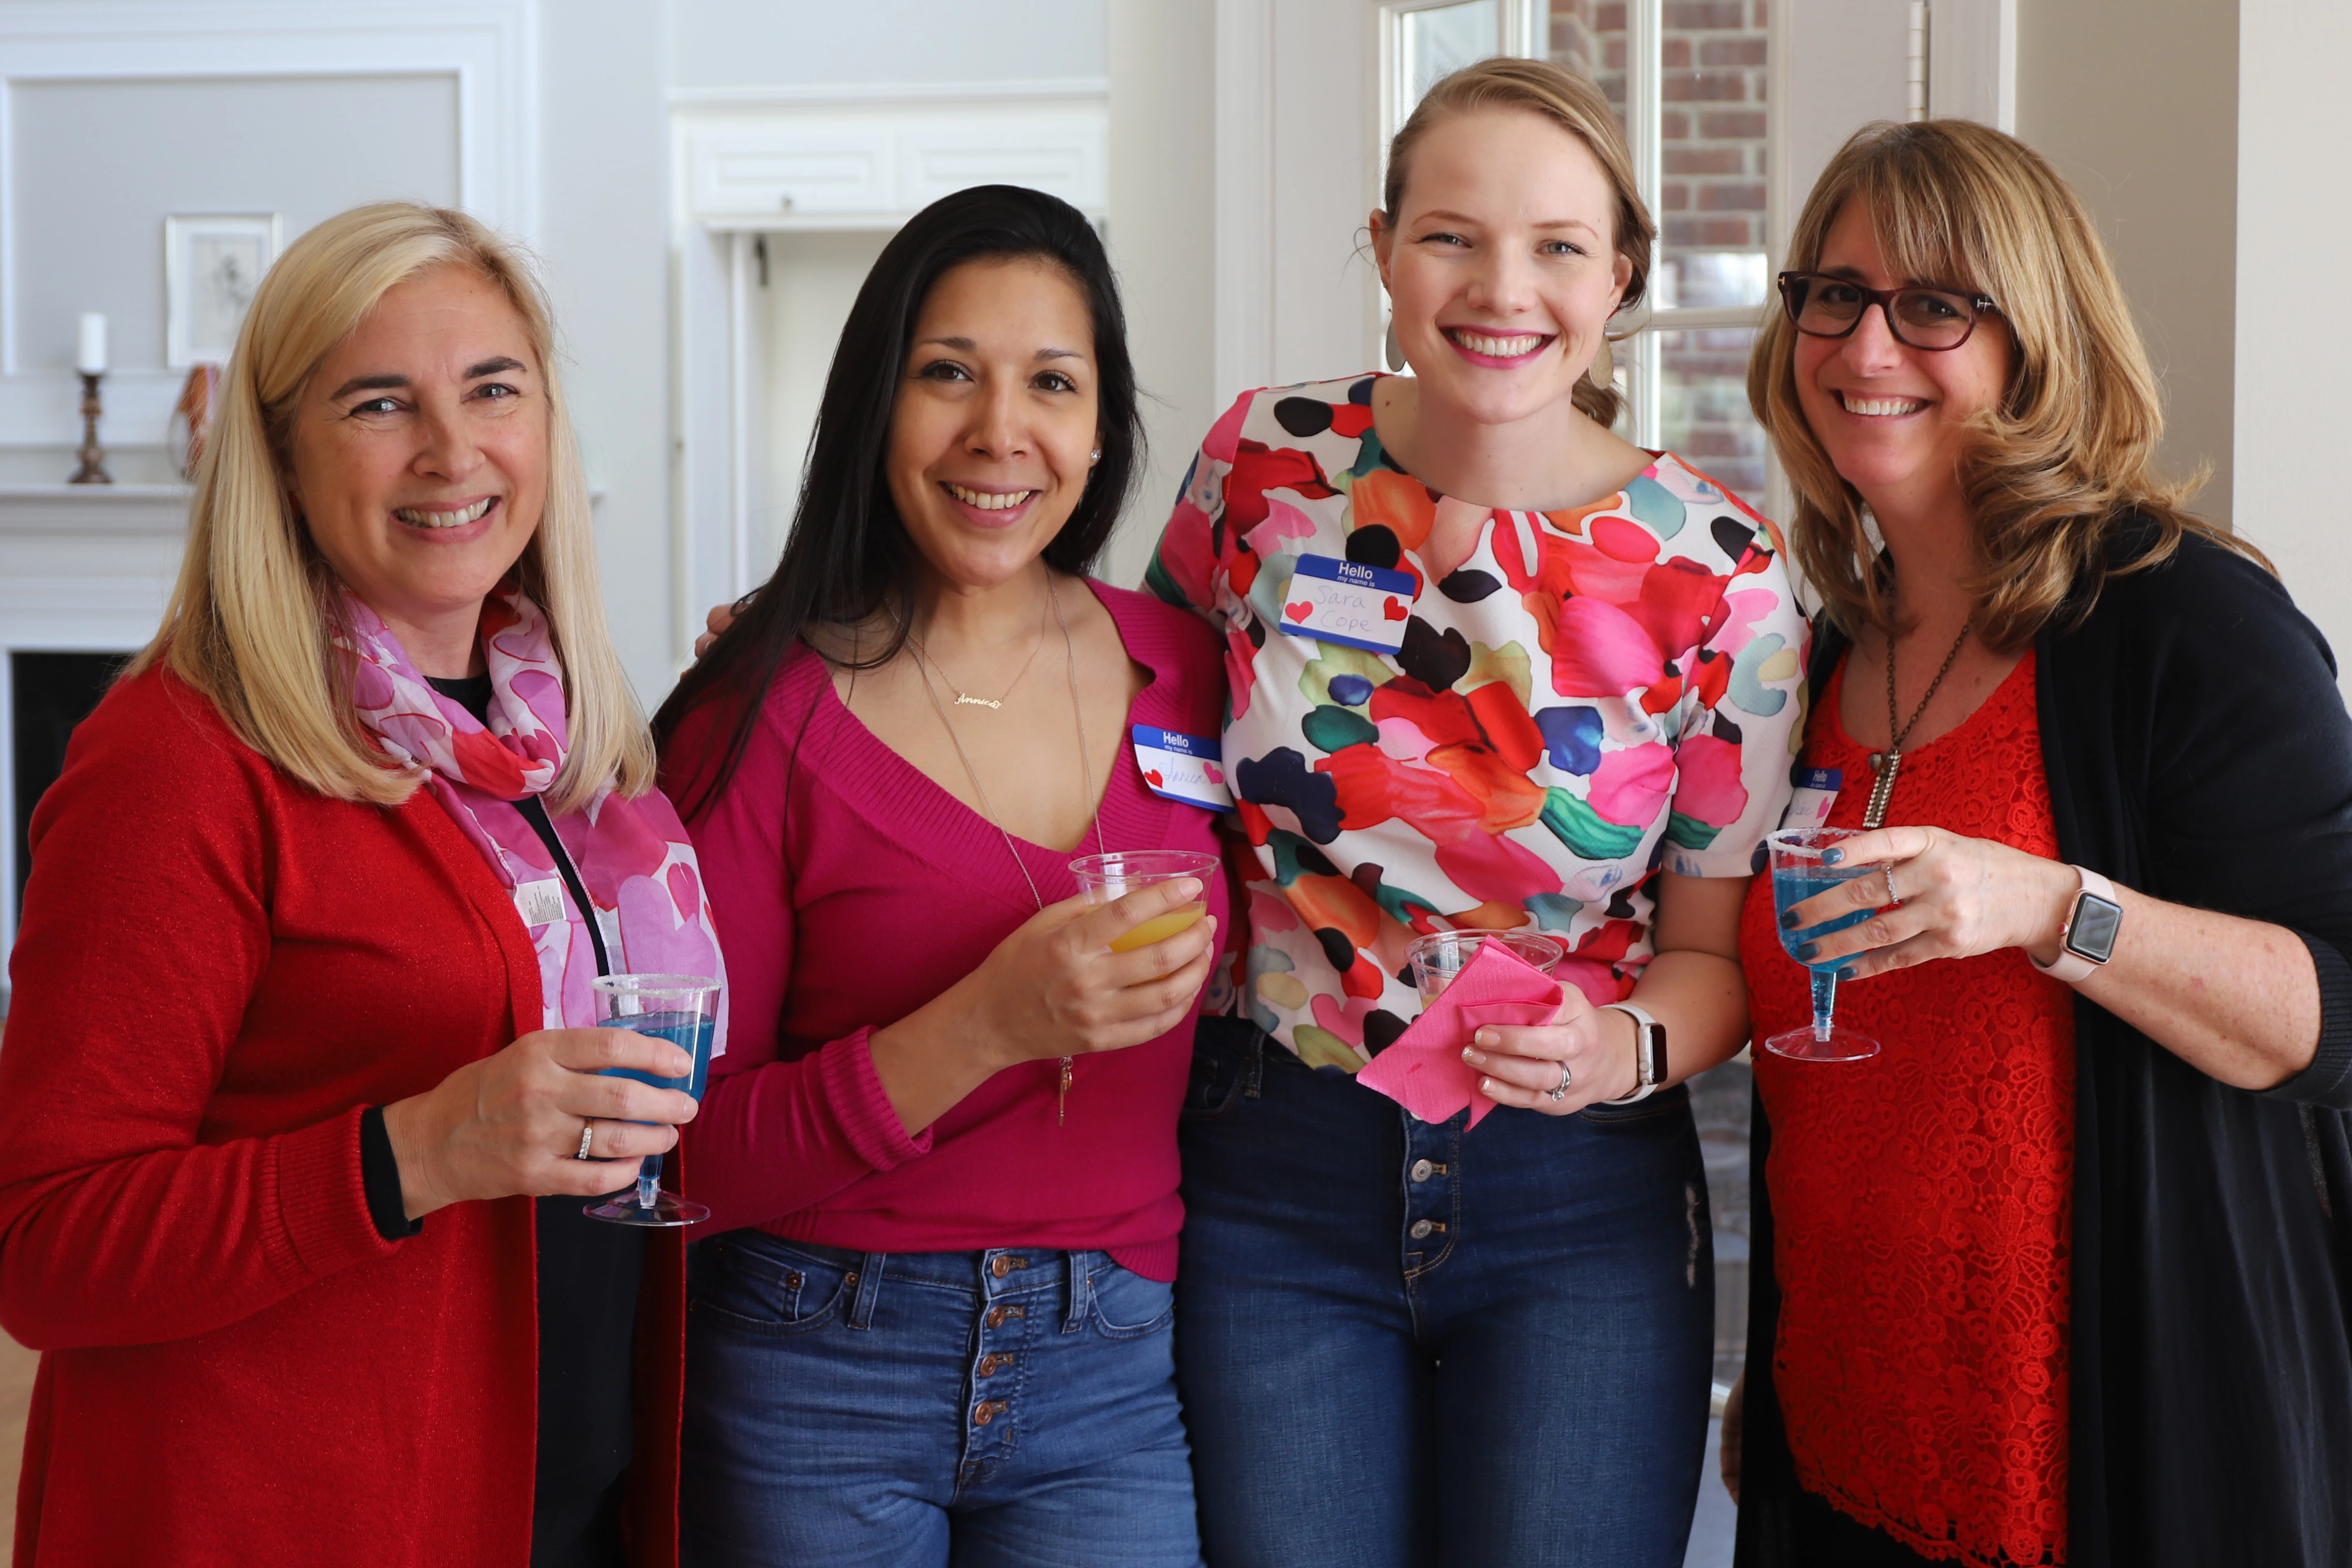 Alumnae in red shirts celebrate galentines day together